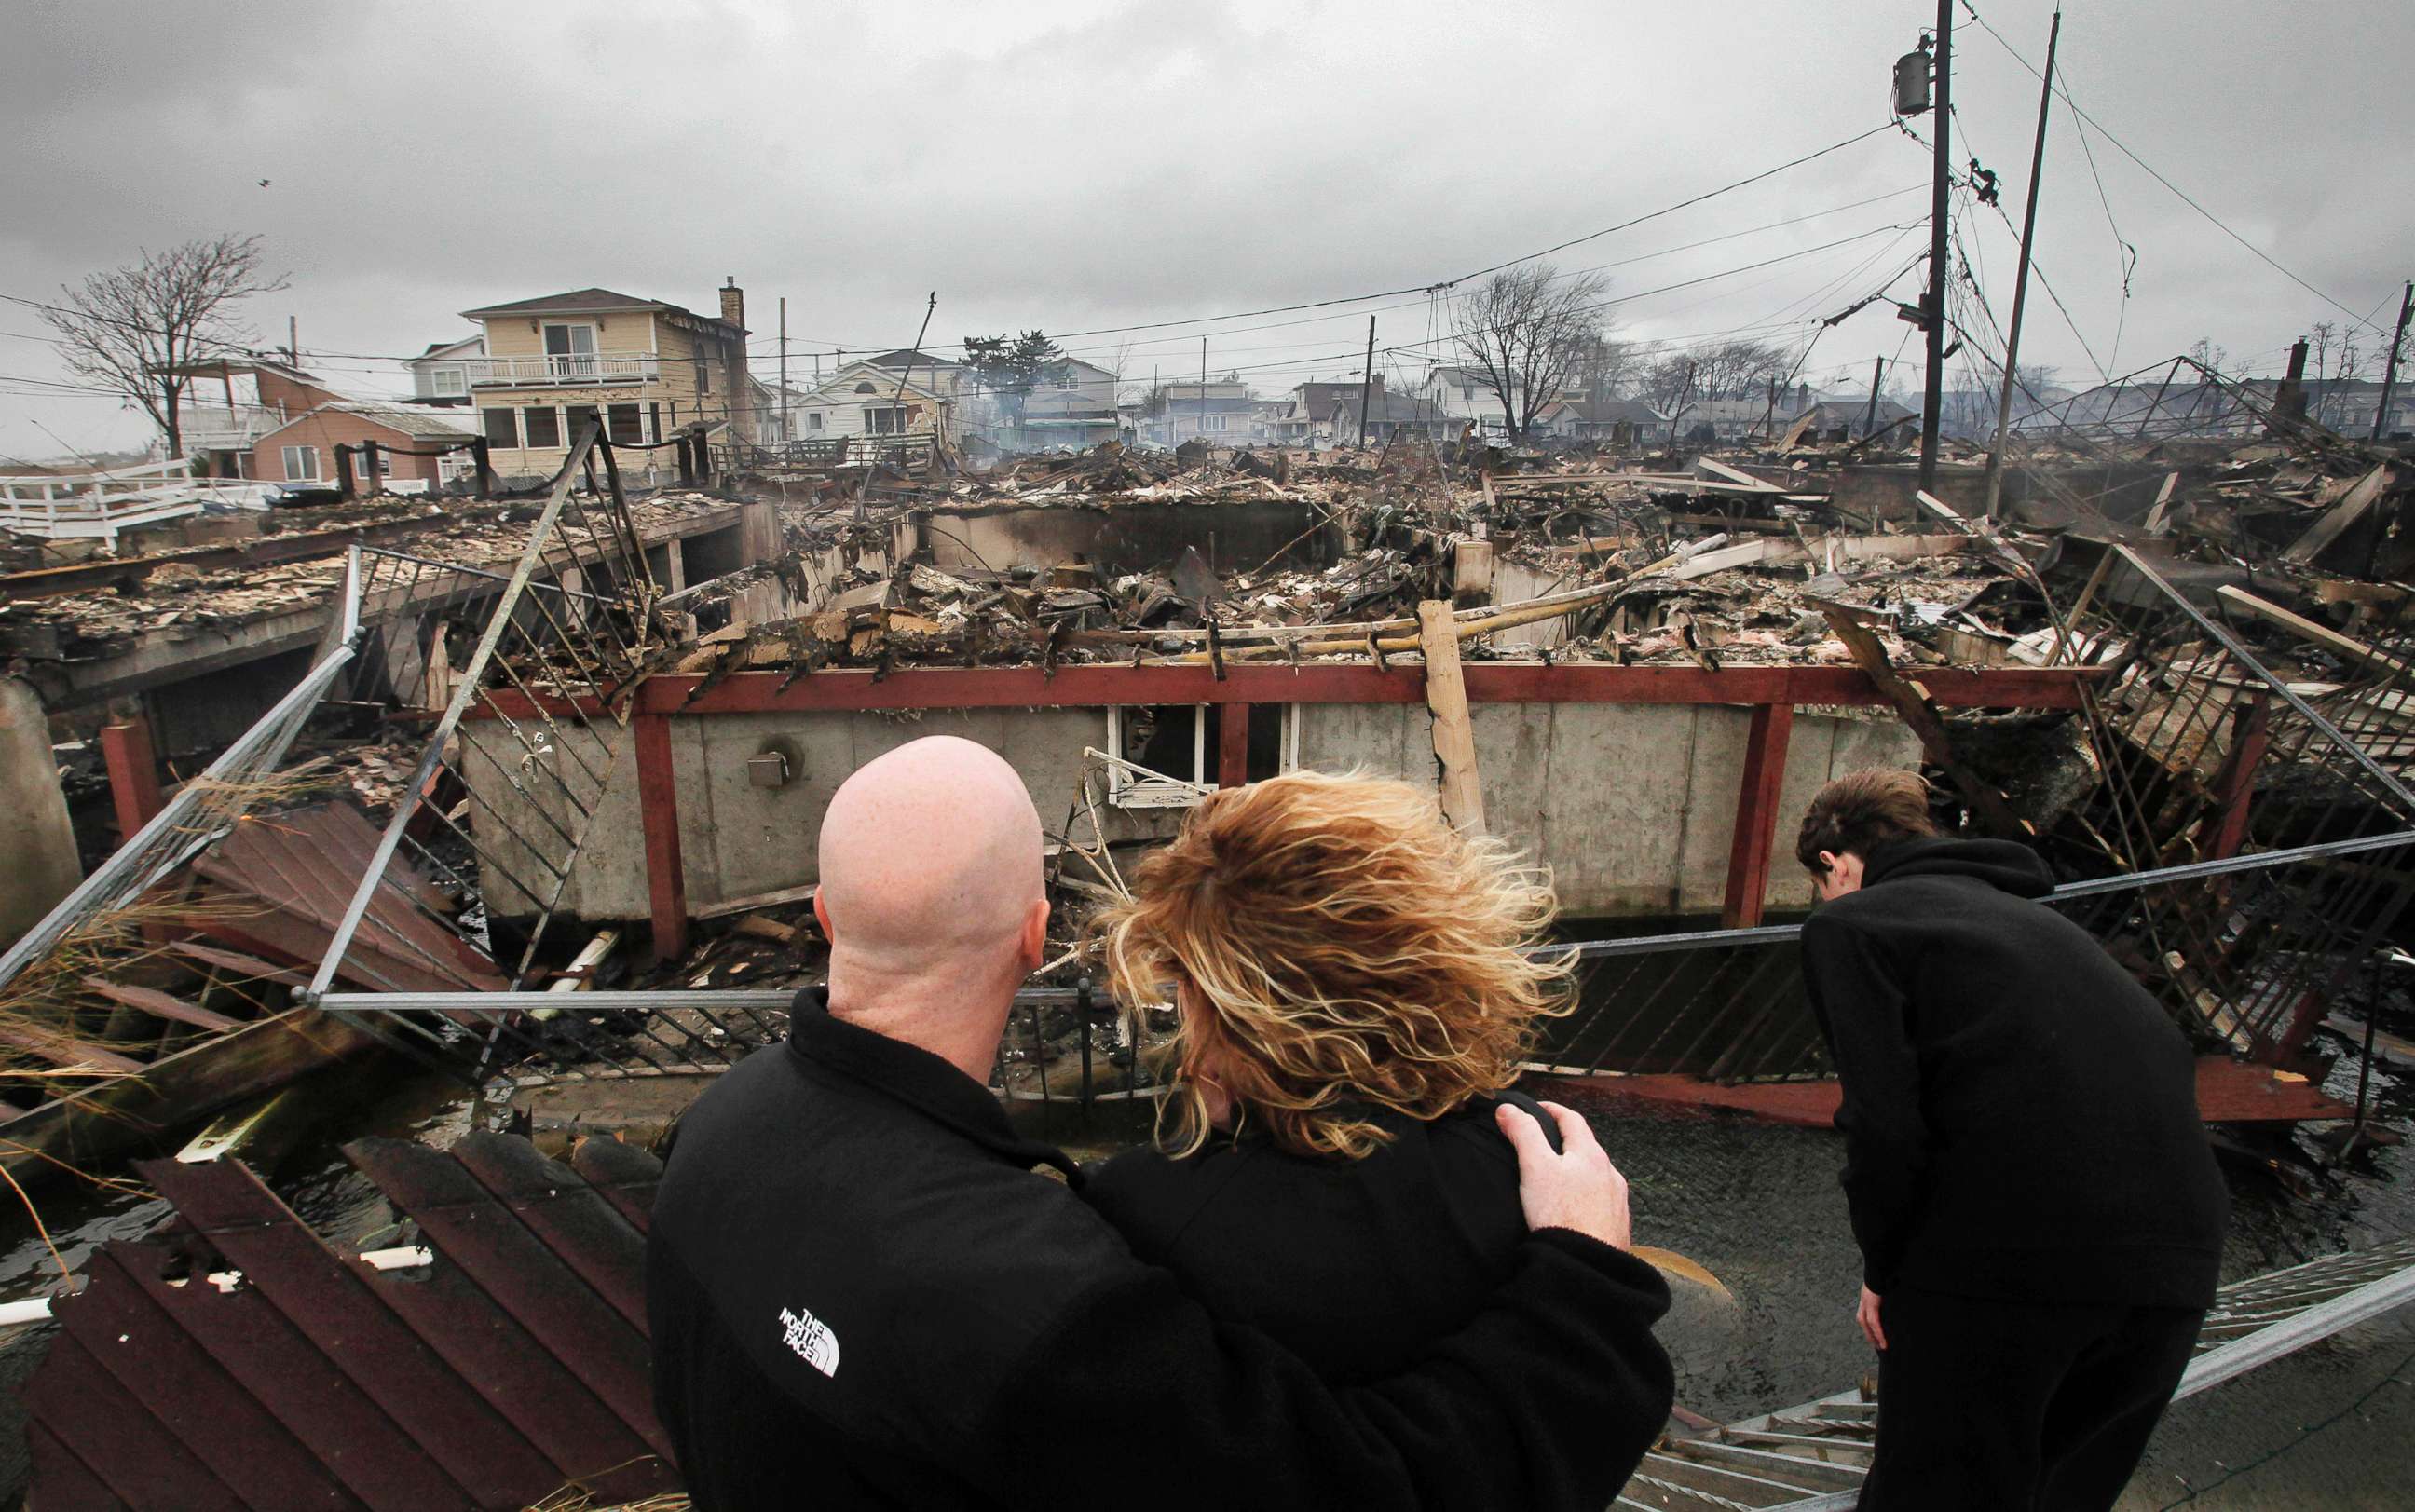 PHOTO: Robert Connolly, left, embraces his wife Laura as they survey the remains of the home owned by her parents that burned to the ground during Superstorm Sandy in the Breezy Point section of New York, Oct. 30, 2012. 